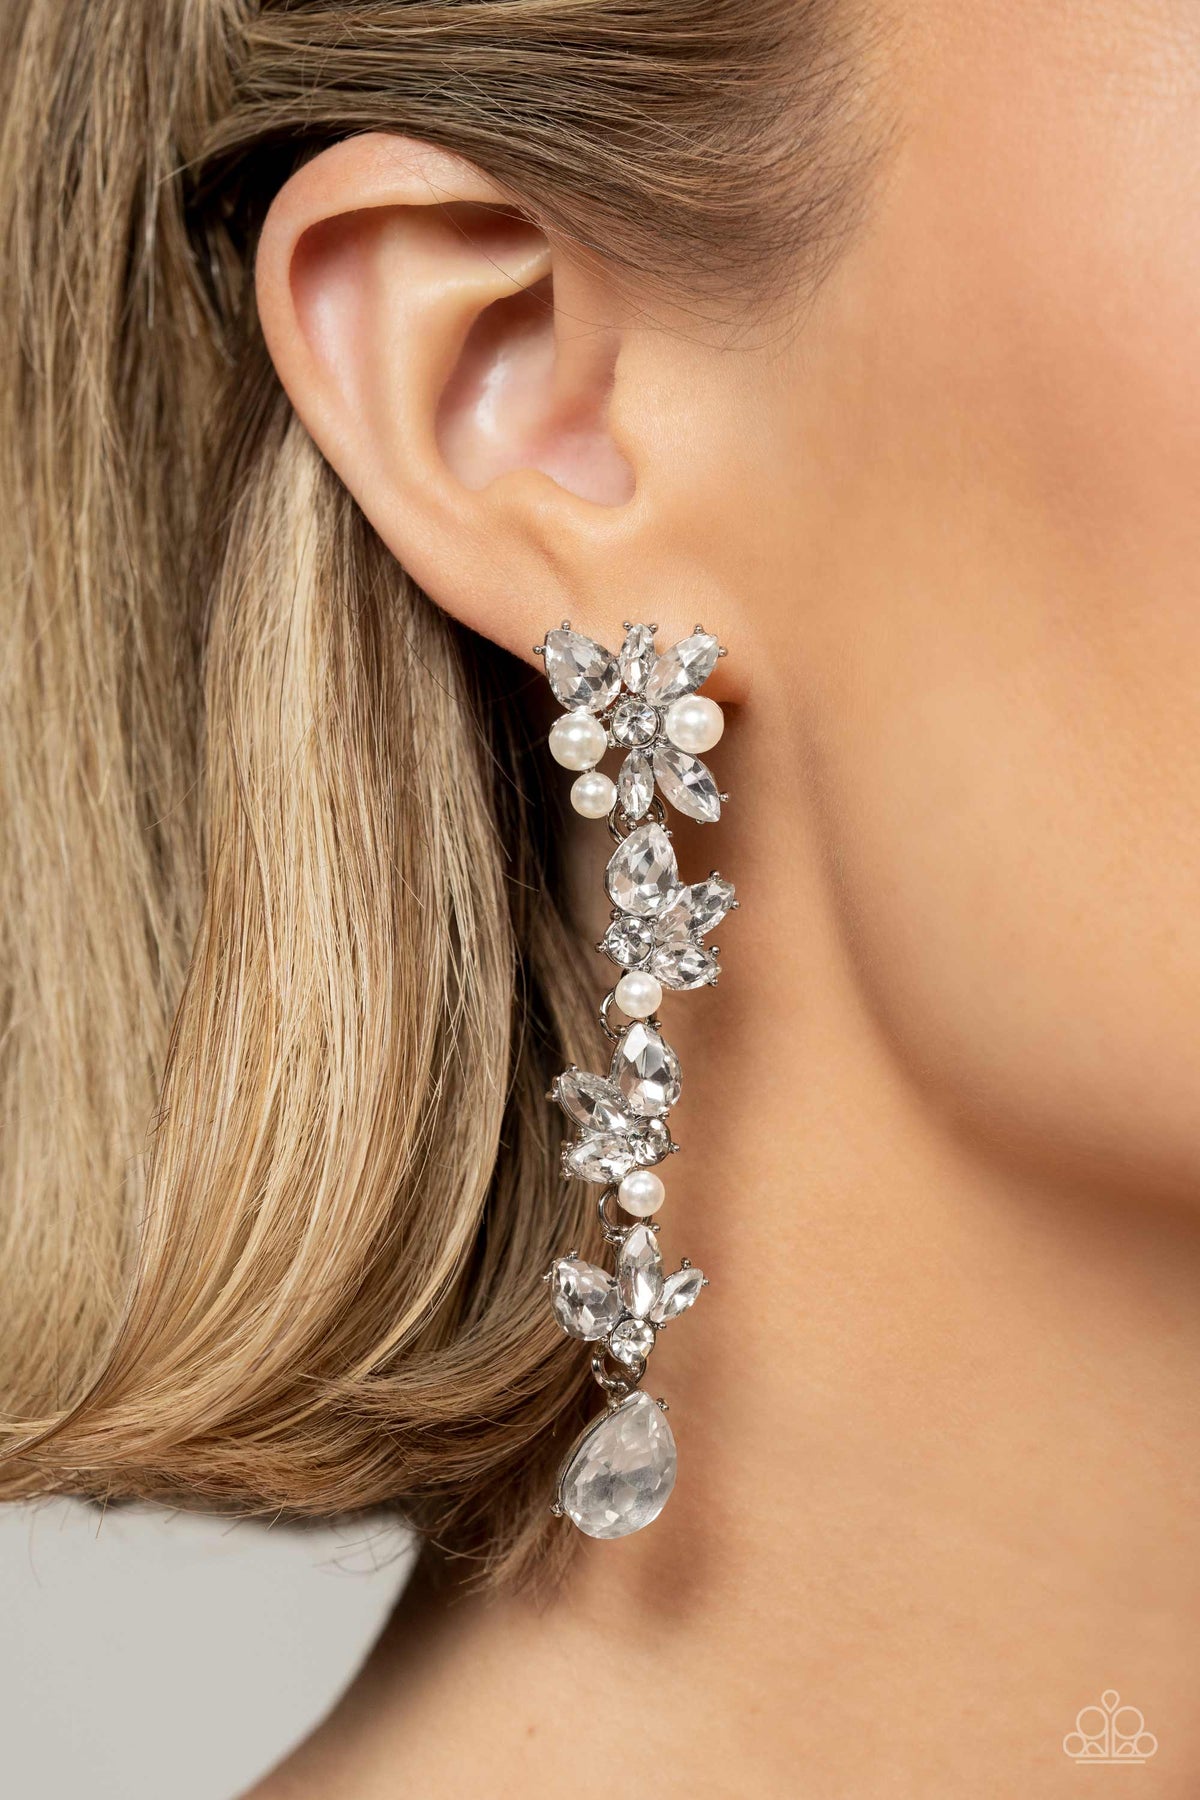 LIGHT at the Opera White Rhinestone &amp; Pearl Earrings - Paparazzi Accessories-on model - CarasShop.com - $5 Jewelry by Cara Jewels